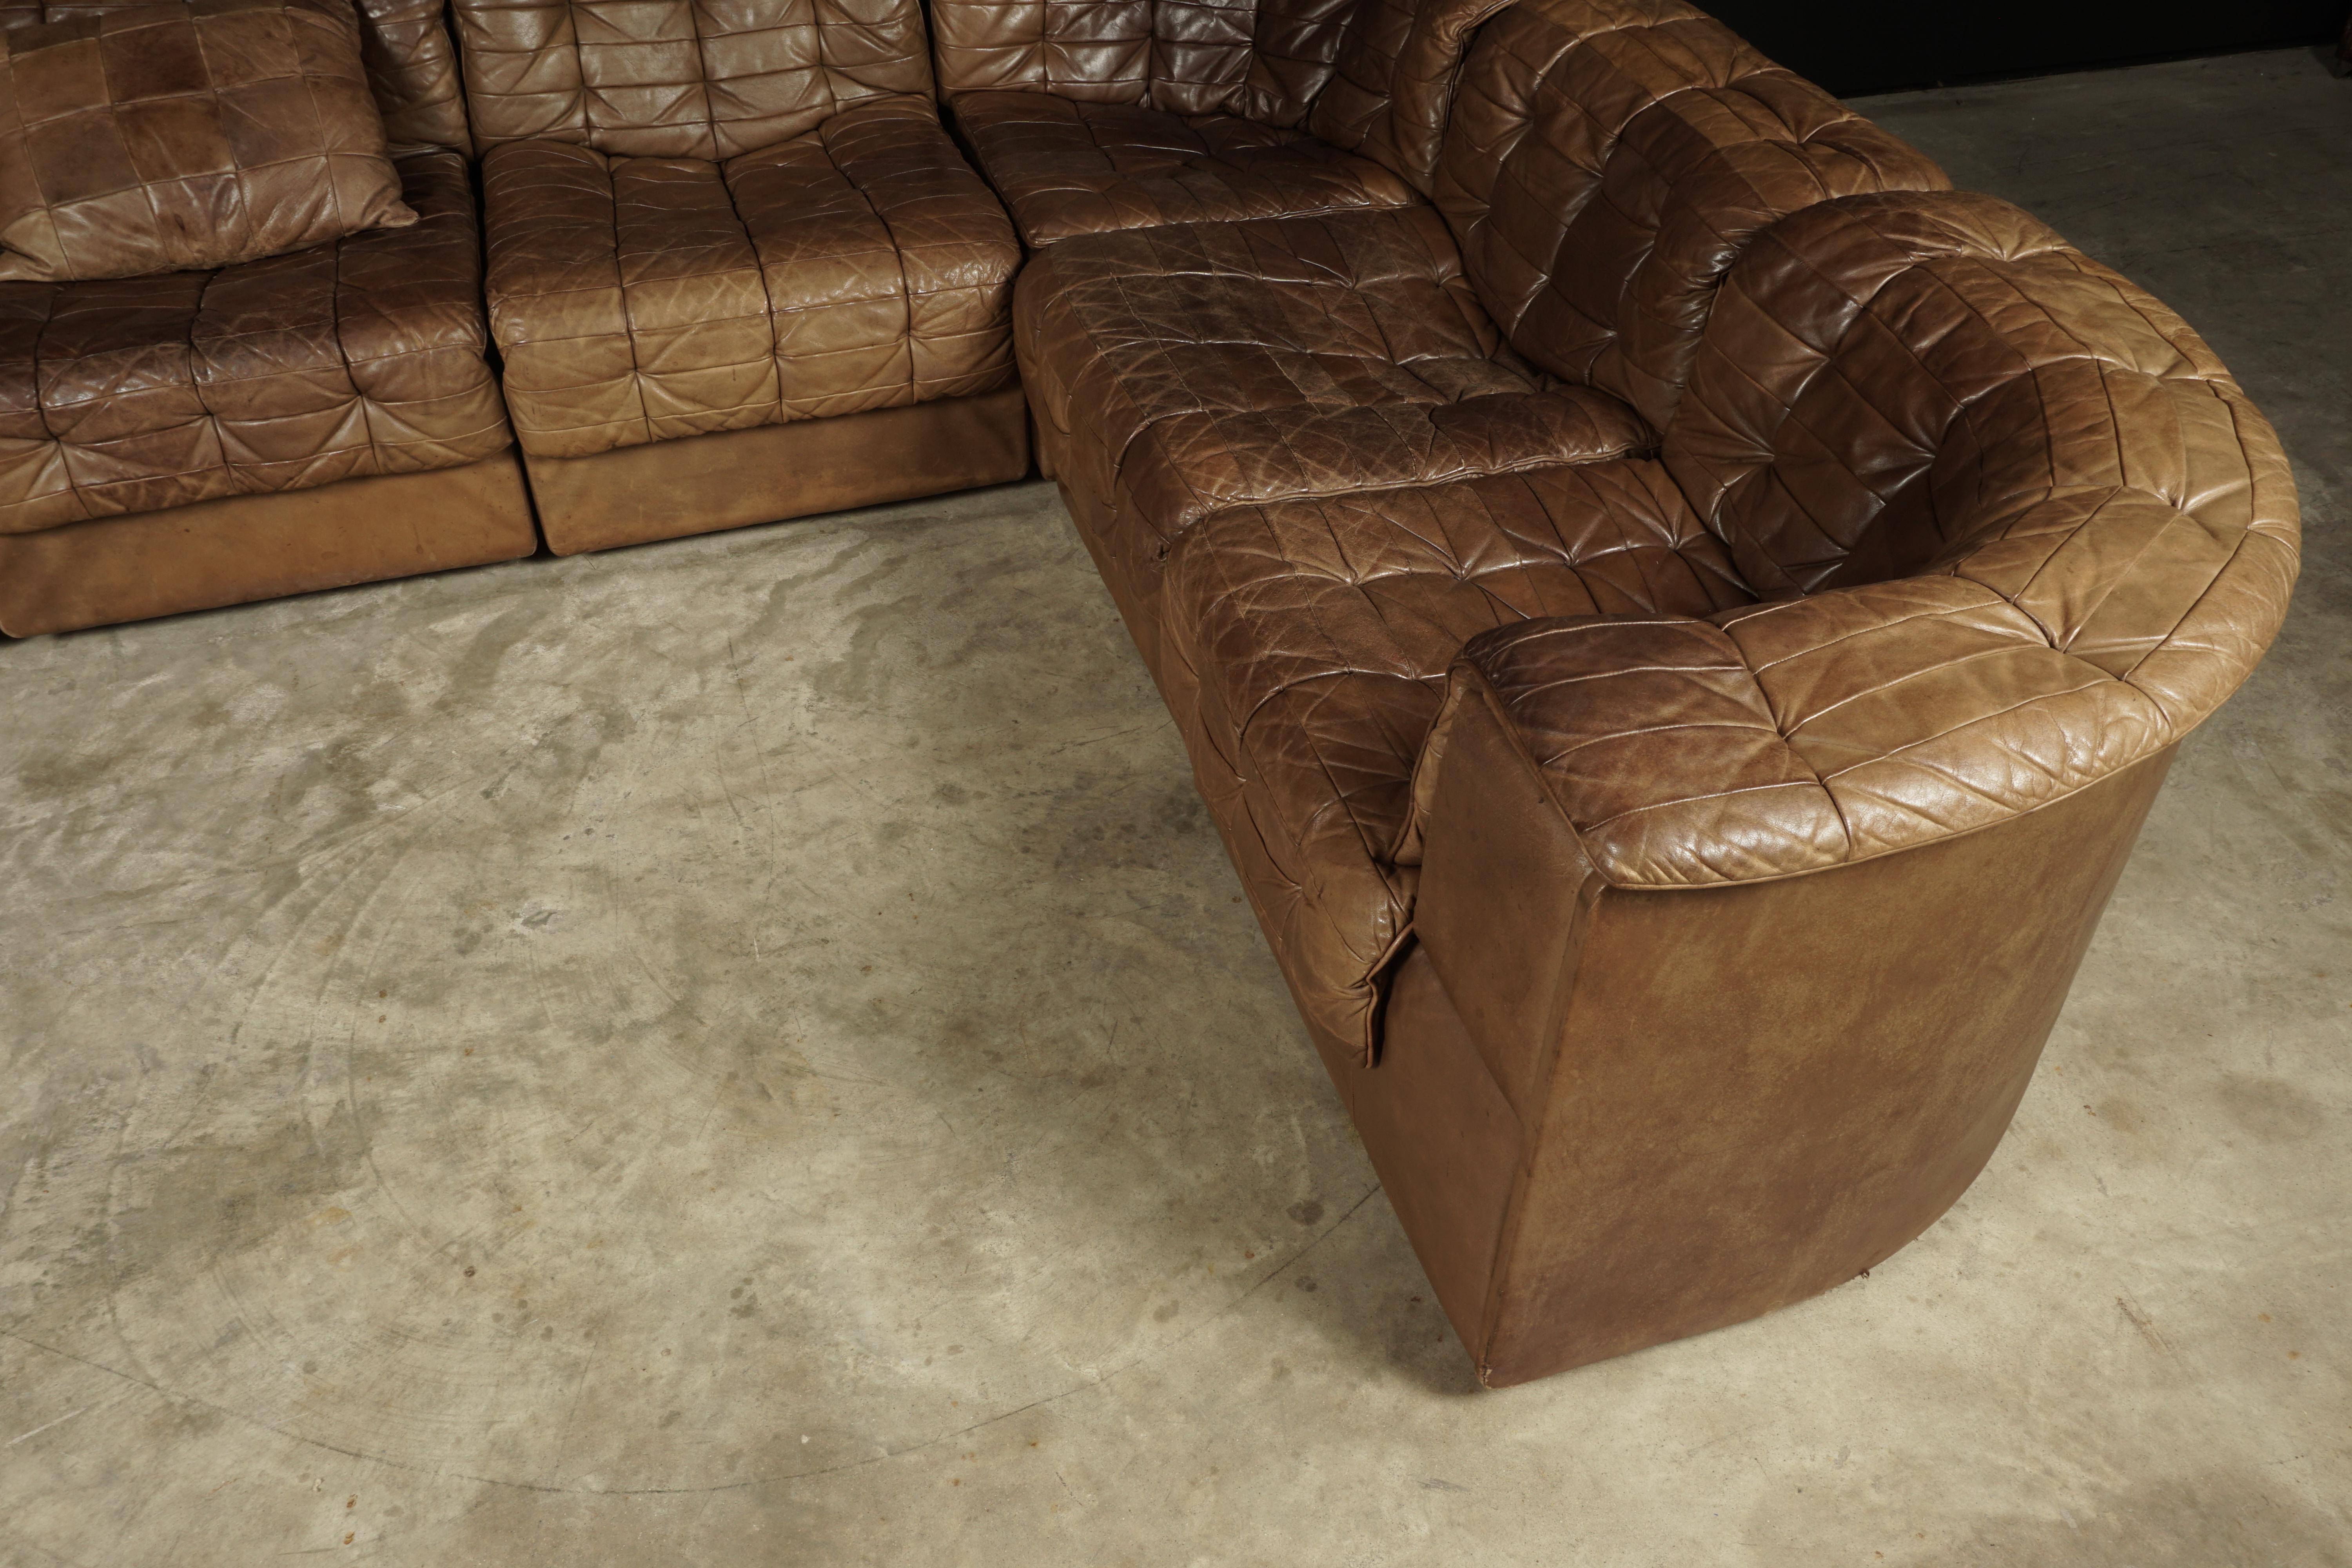 De Sede Ds 11 Sectional Patchwork sofa in Cognac Leather, 1970s. Six modular pieces that can be arranged to your wishes. Manufactured by De Sede in Switzerland. Leather with great wear and patina. Corner element measures: 
D - 32.5
H - 24.5
W -